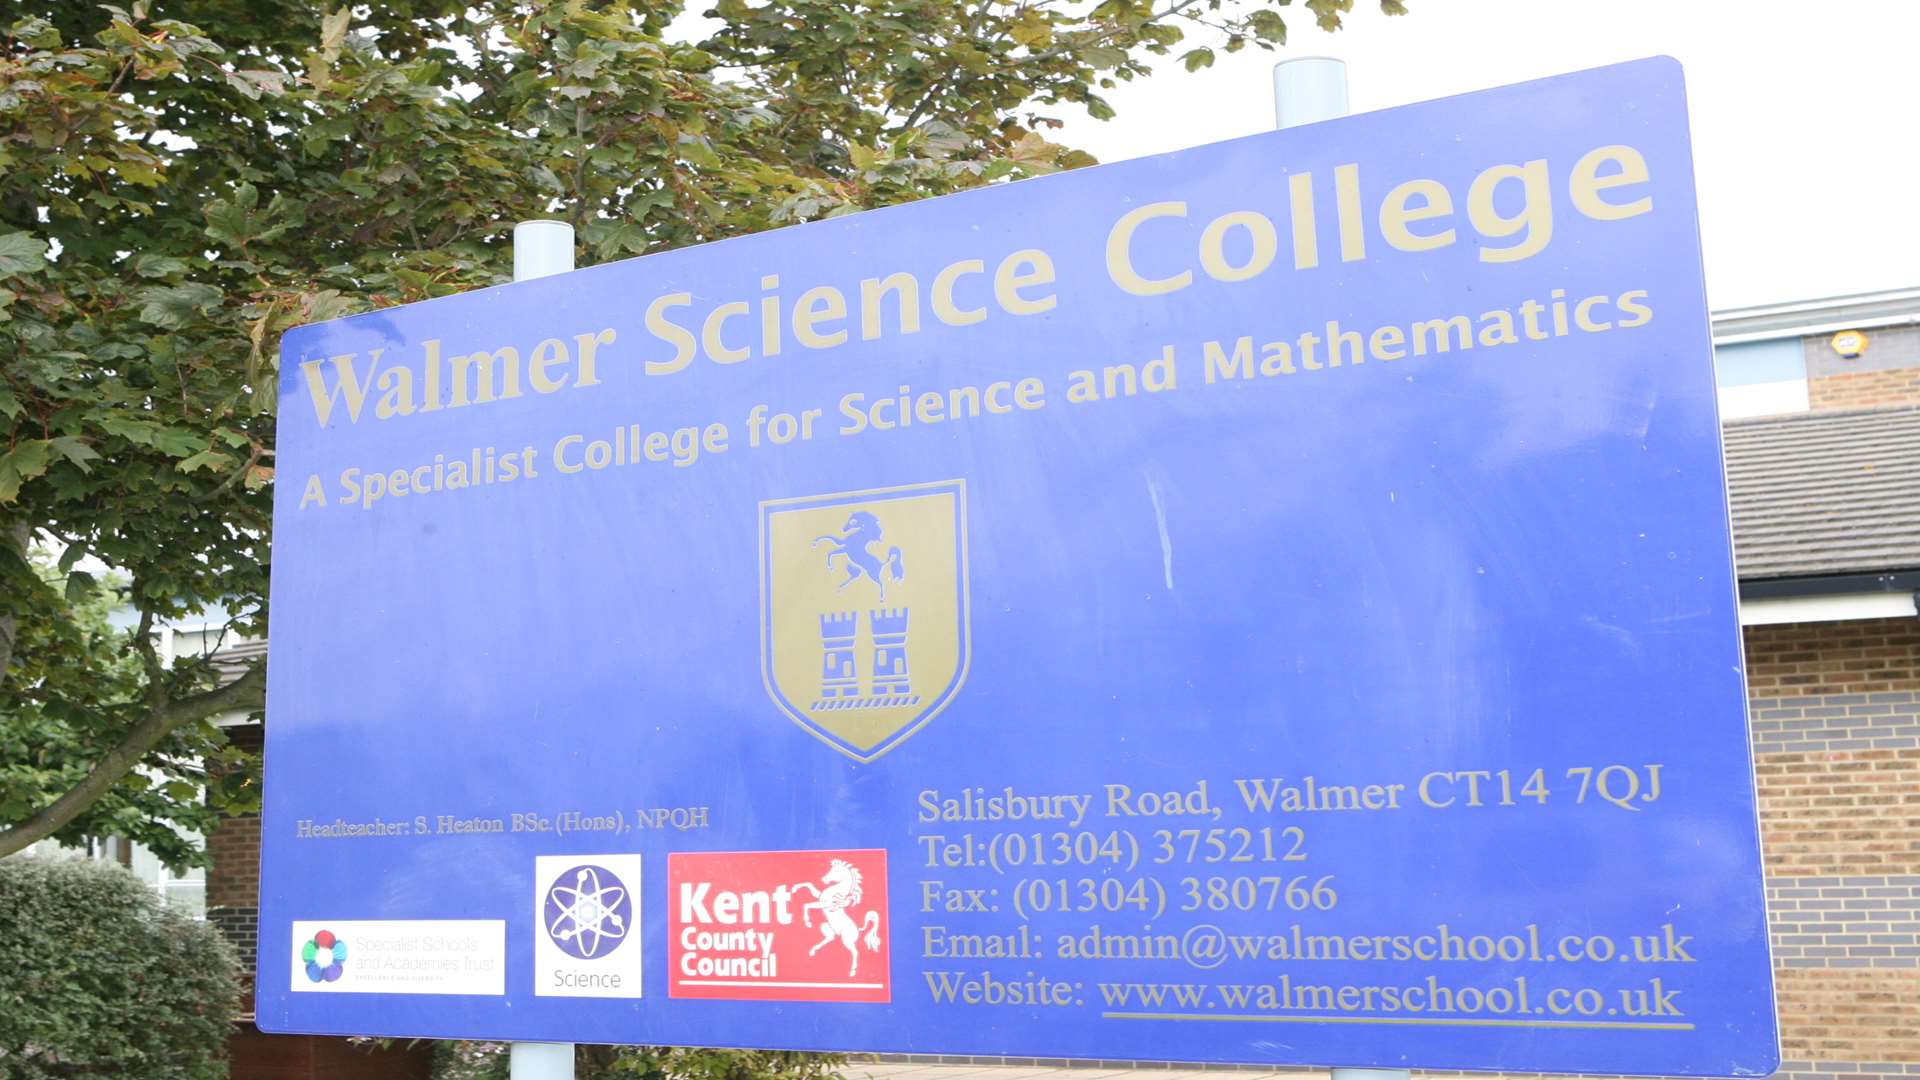 KCC has committed to retaining the Walmer Science College site for educational use